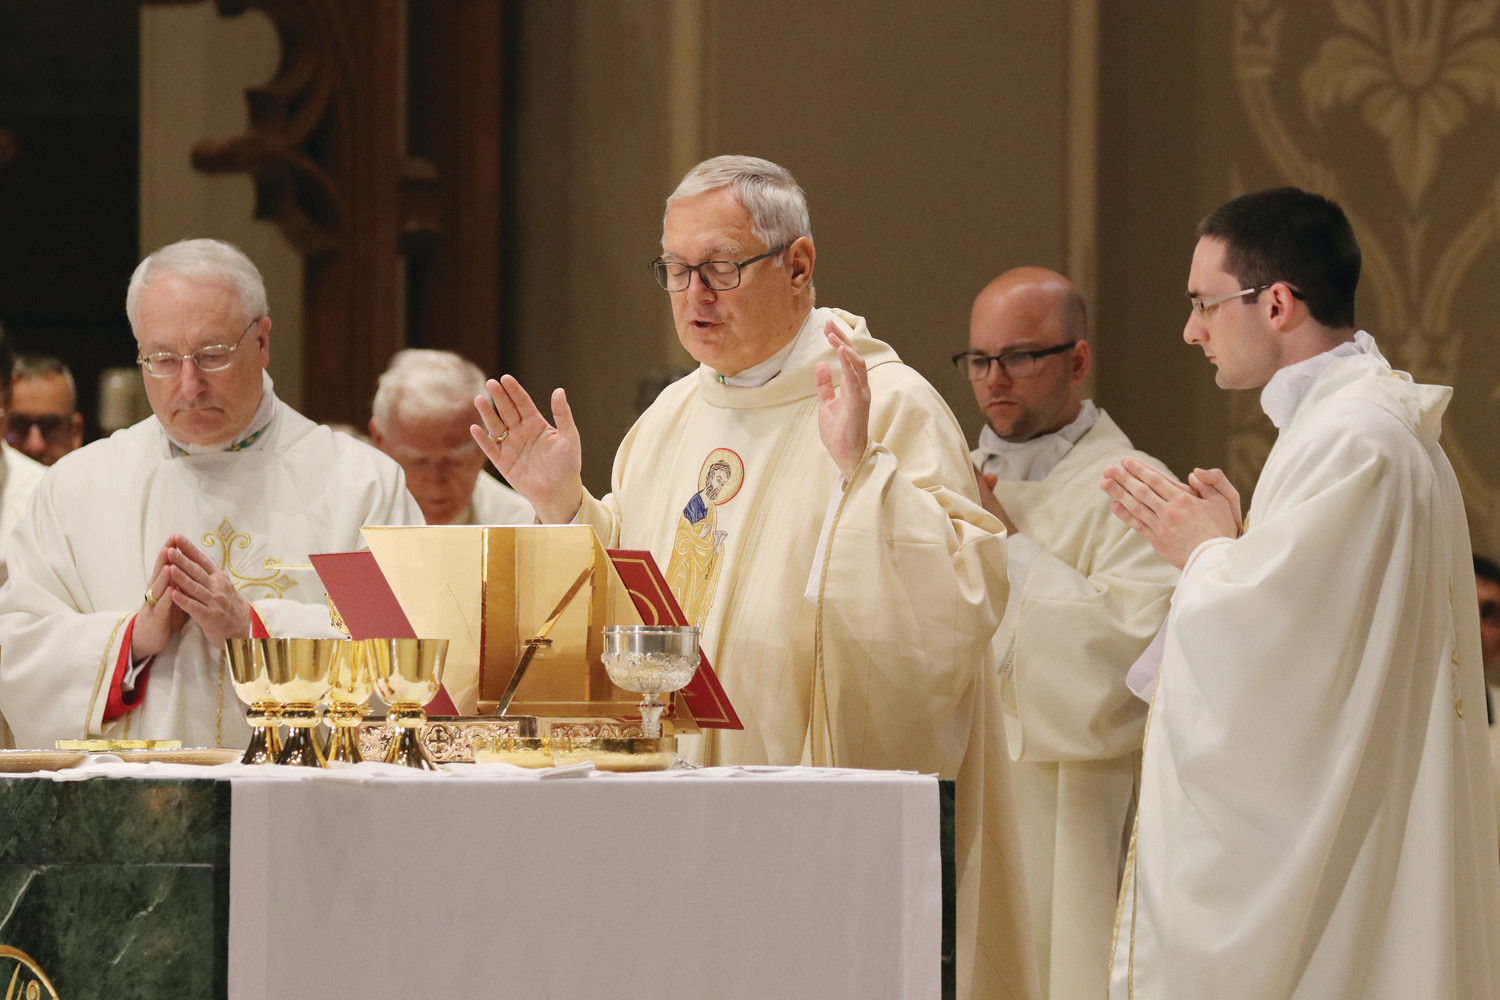 Father Dufour joins Bishop Tobin, center, and Auxiliary Bishop Robert C. Evans at the altar.